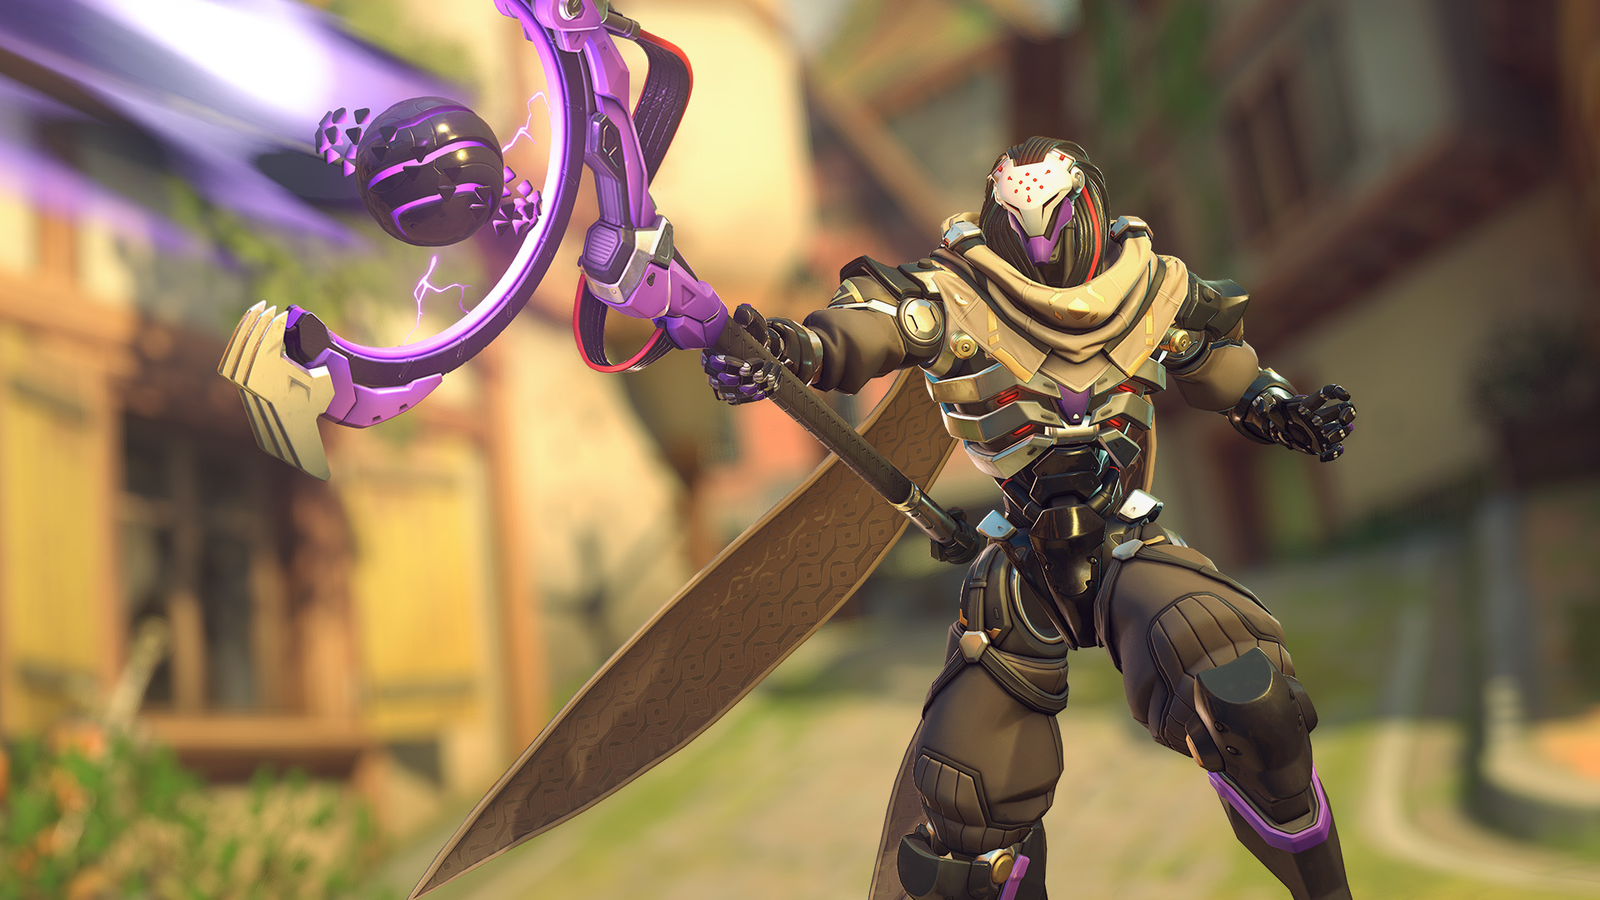 Overwatch 2': Activision Blizzard Cancels Highly-Anticipated Game